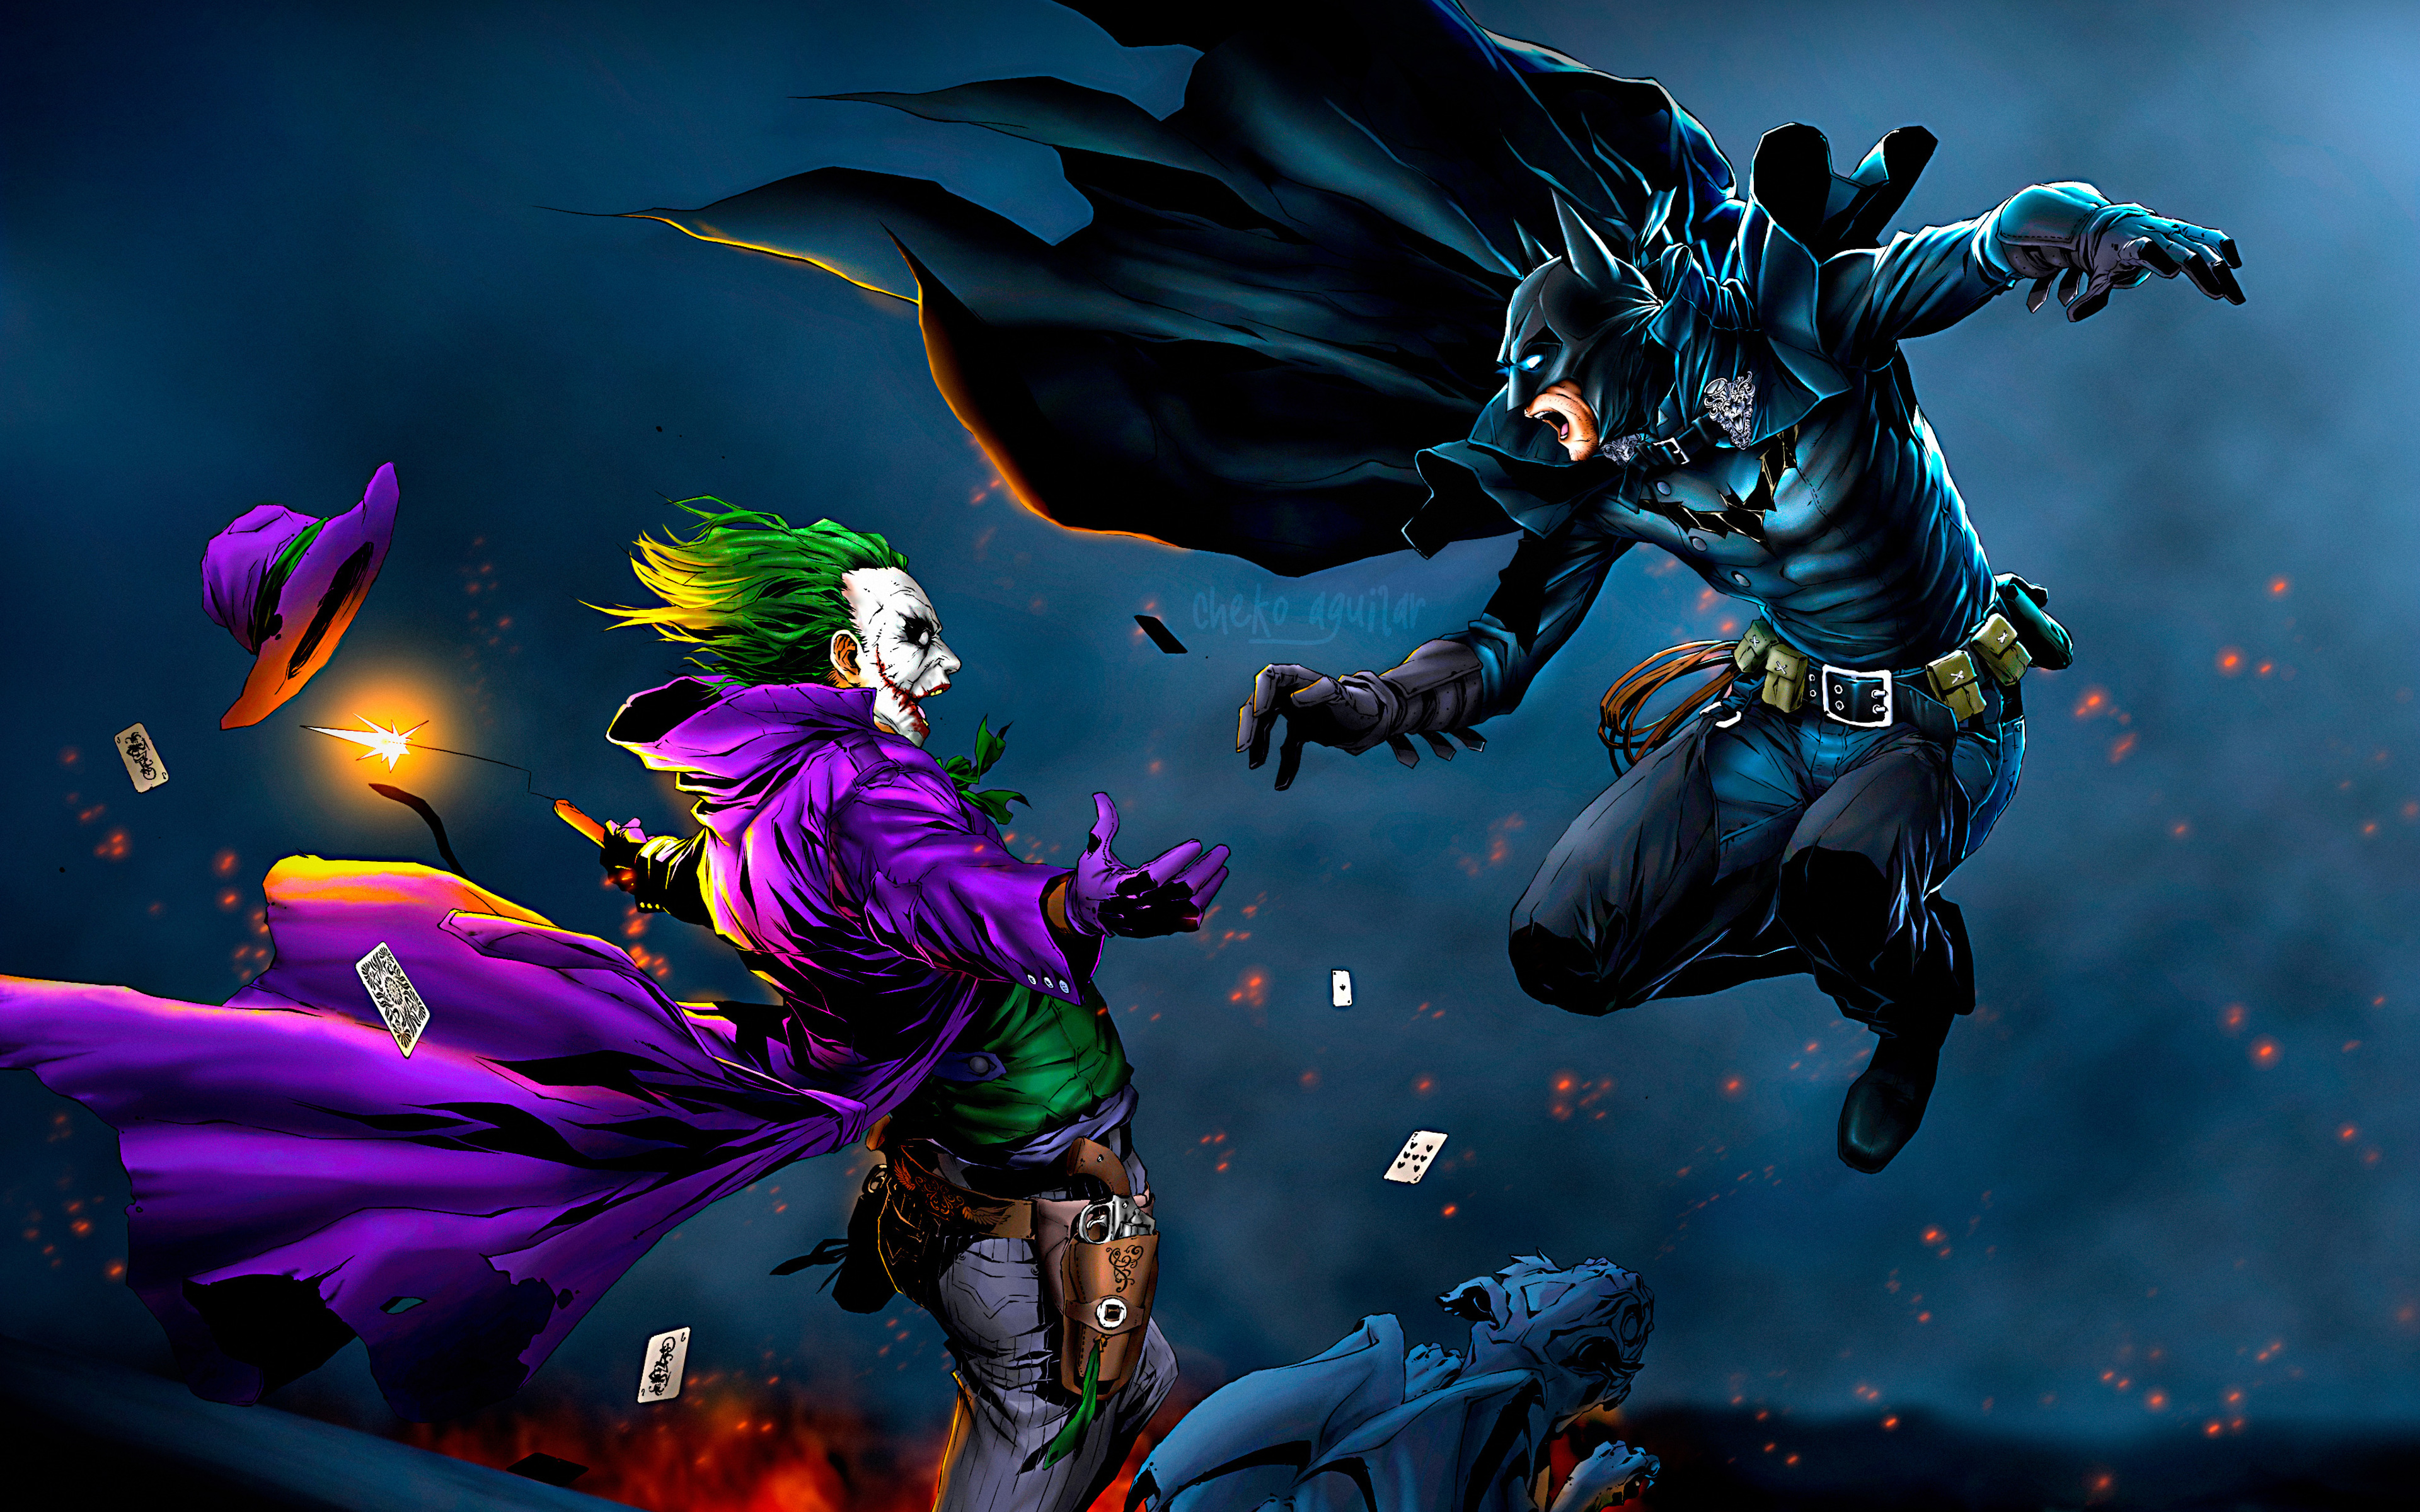 Joker 4k Wallpapers For Your Desktop Or Mobile Screen Free And Easy To Download